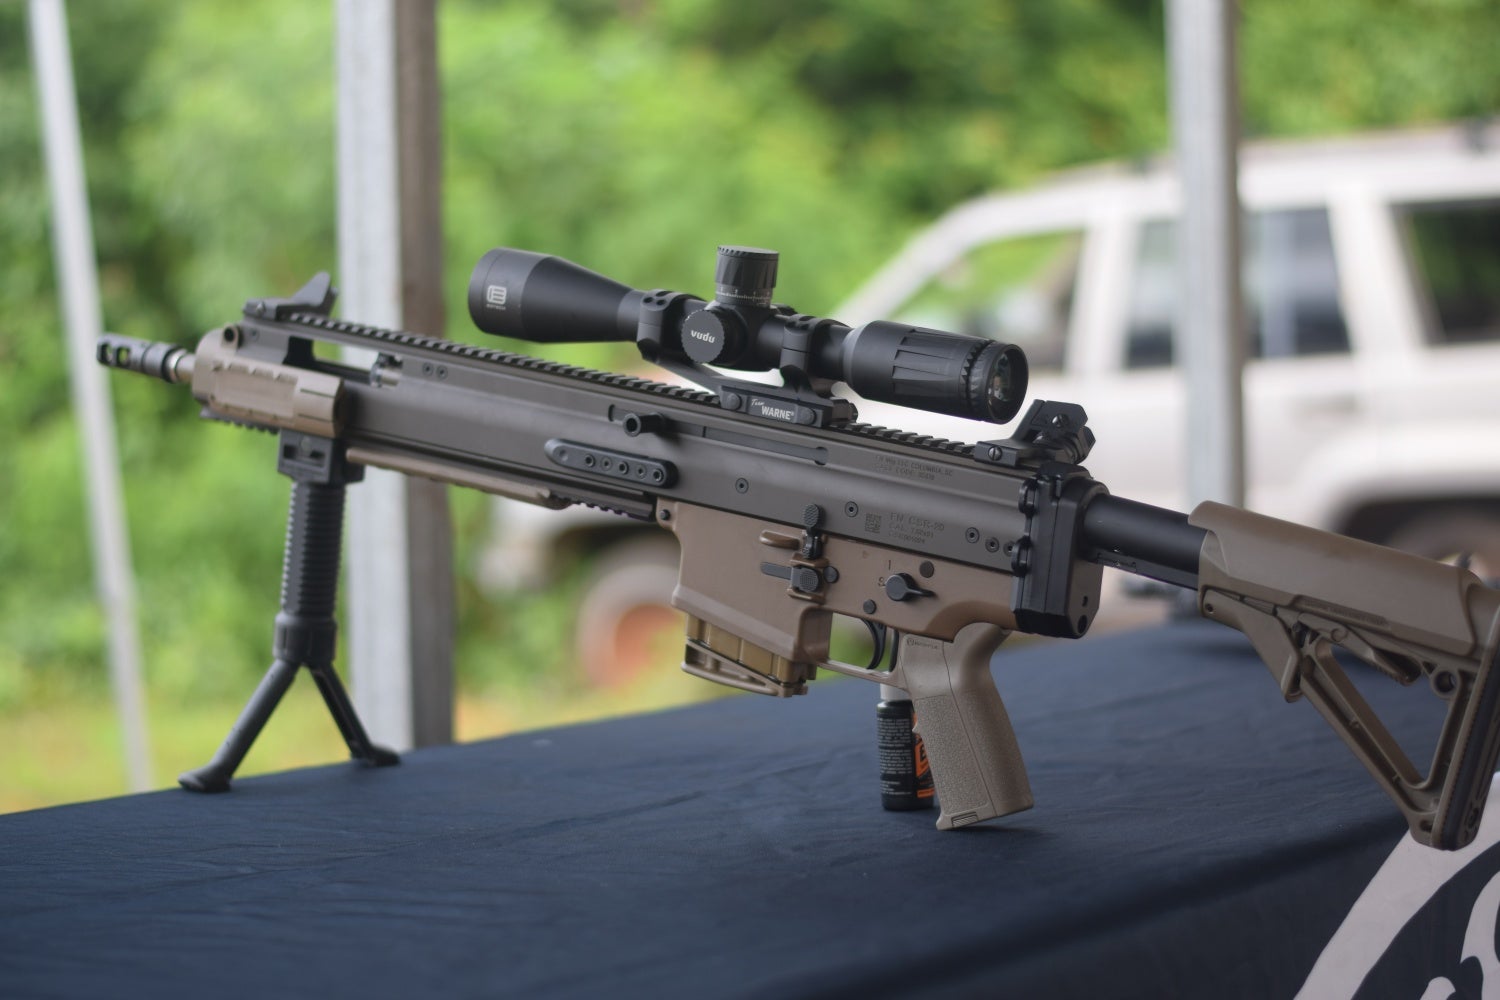 SCAR Owners Group Shoot 2.0 -The Firearm Blog